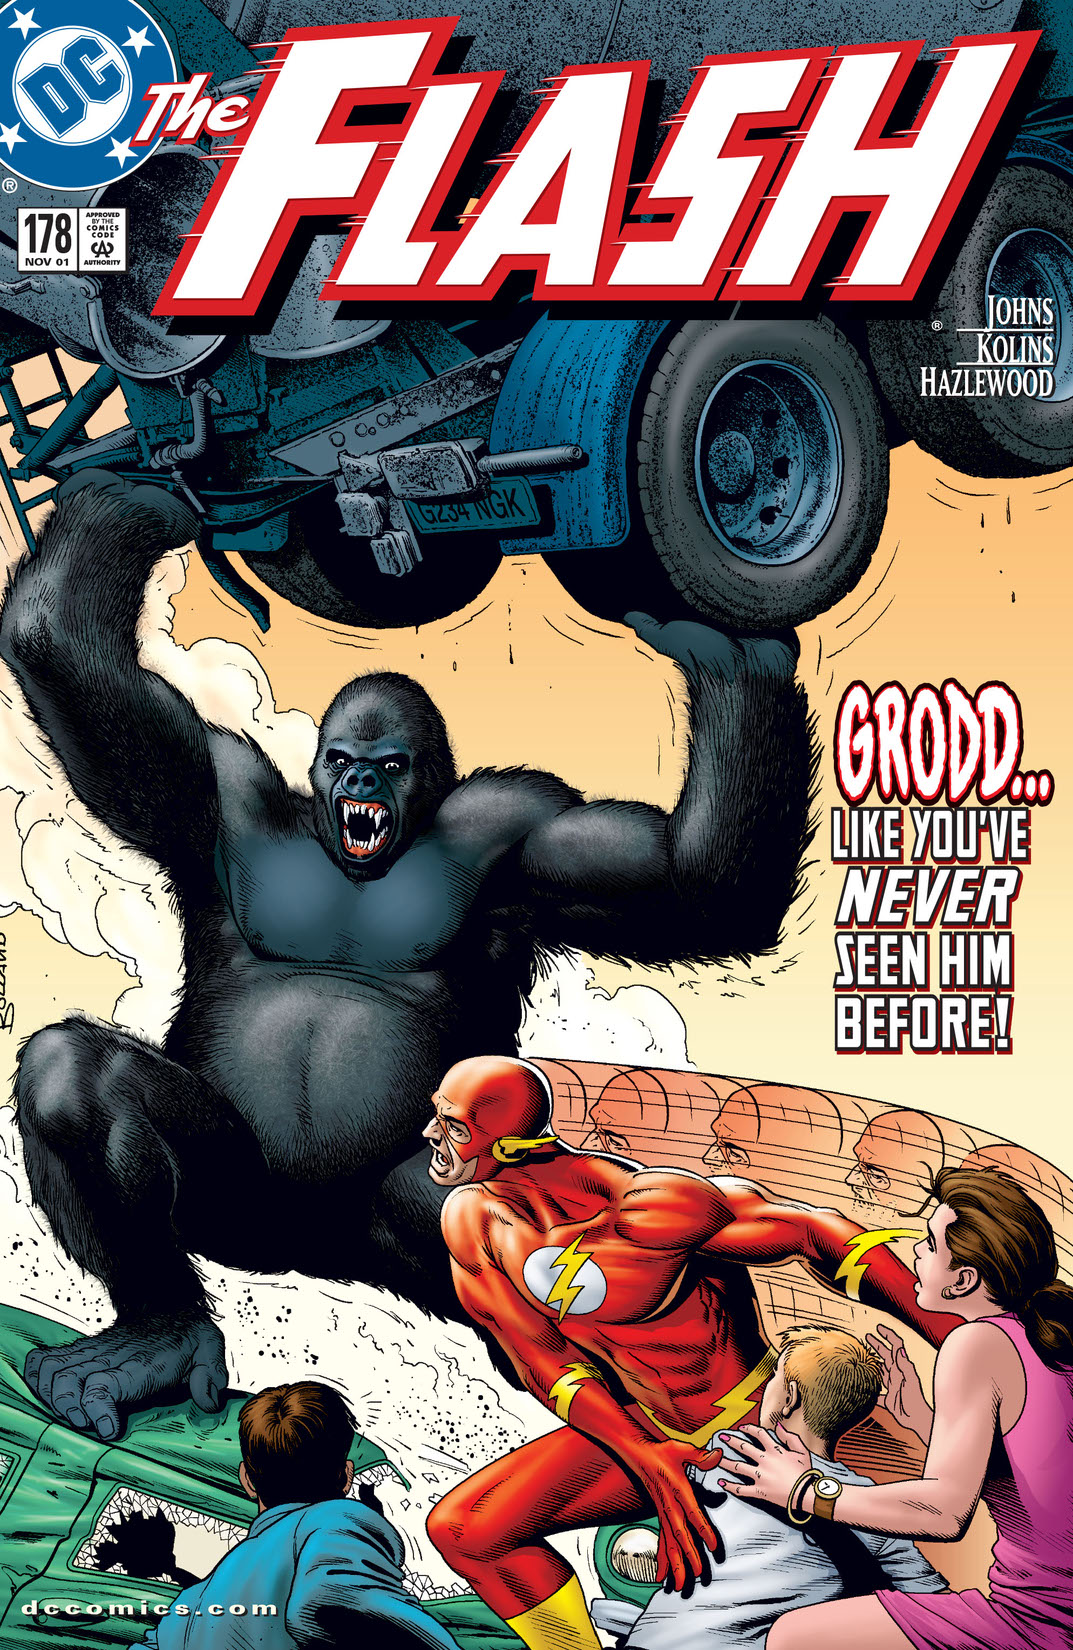 The Flash (1987-2009) #178 preview images